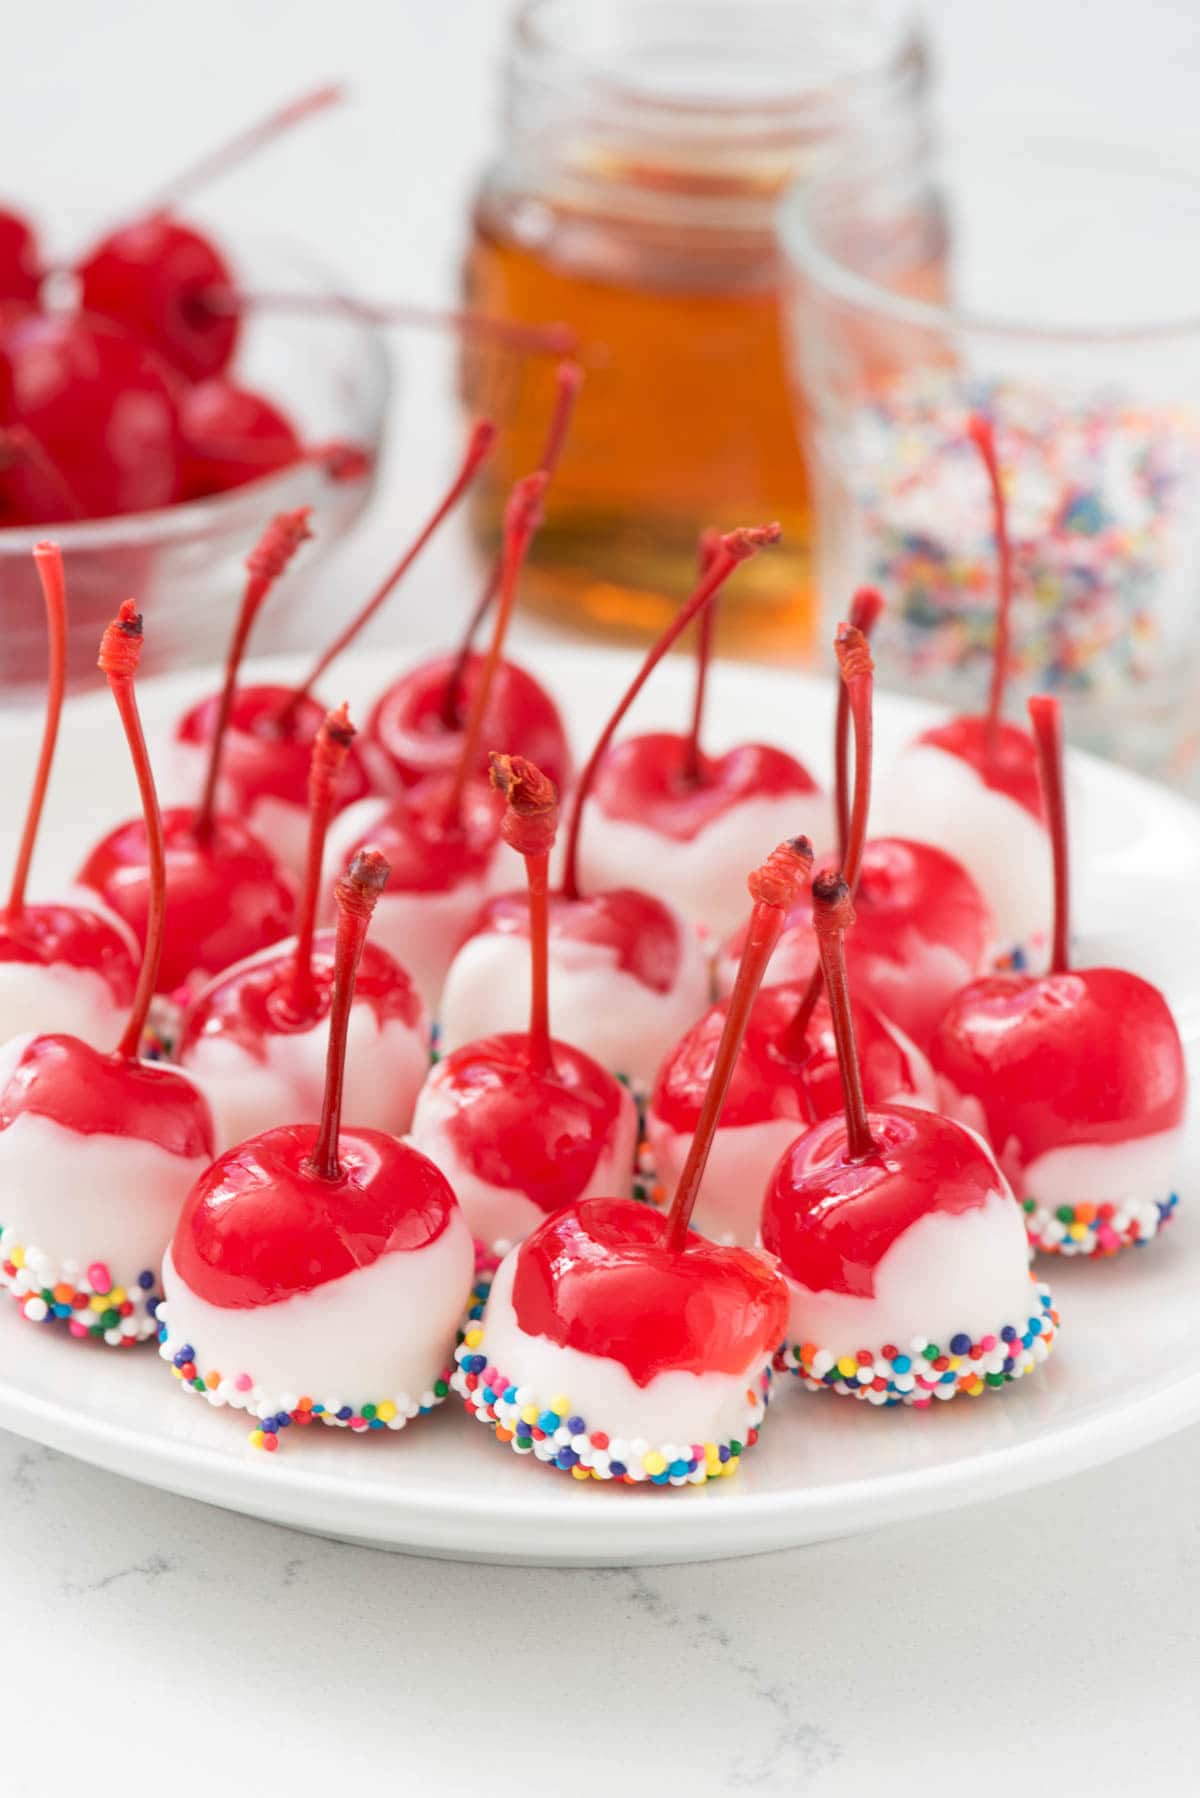 Easy Drunken Cherries - this recipe has just 4 ingredients! Dip alcohol soaked cherries in chocolate for a quick party dessert!